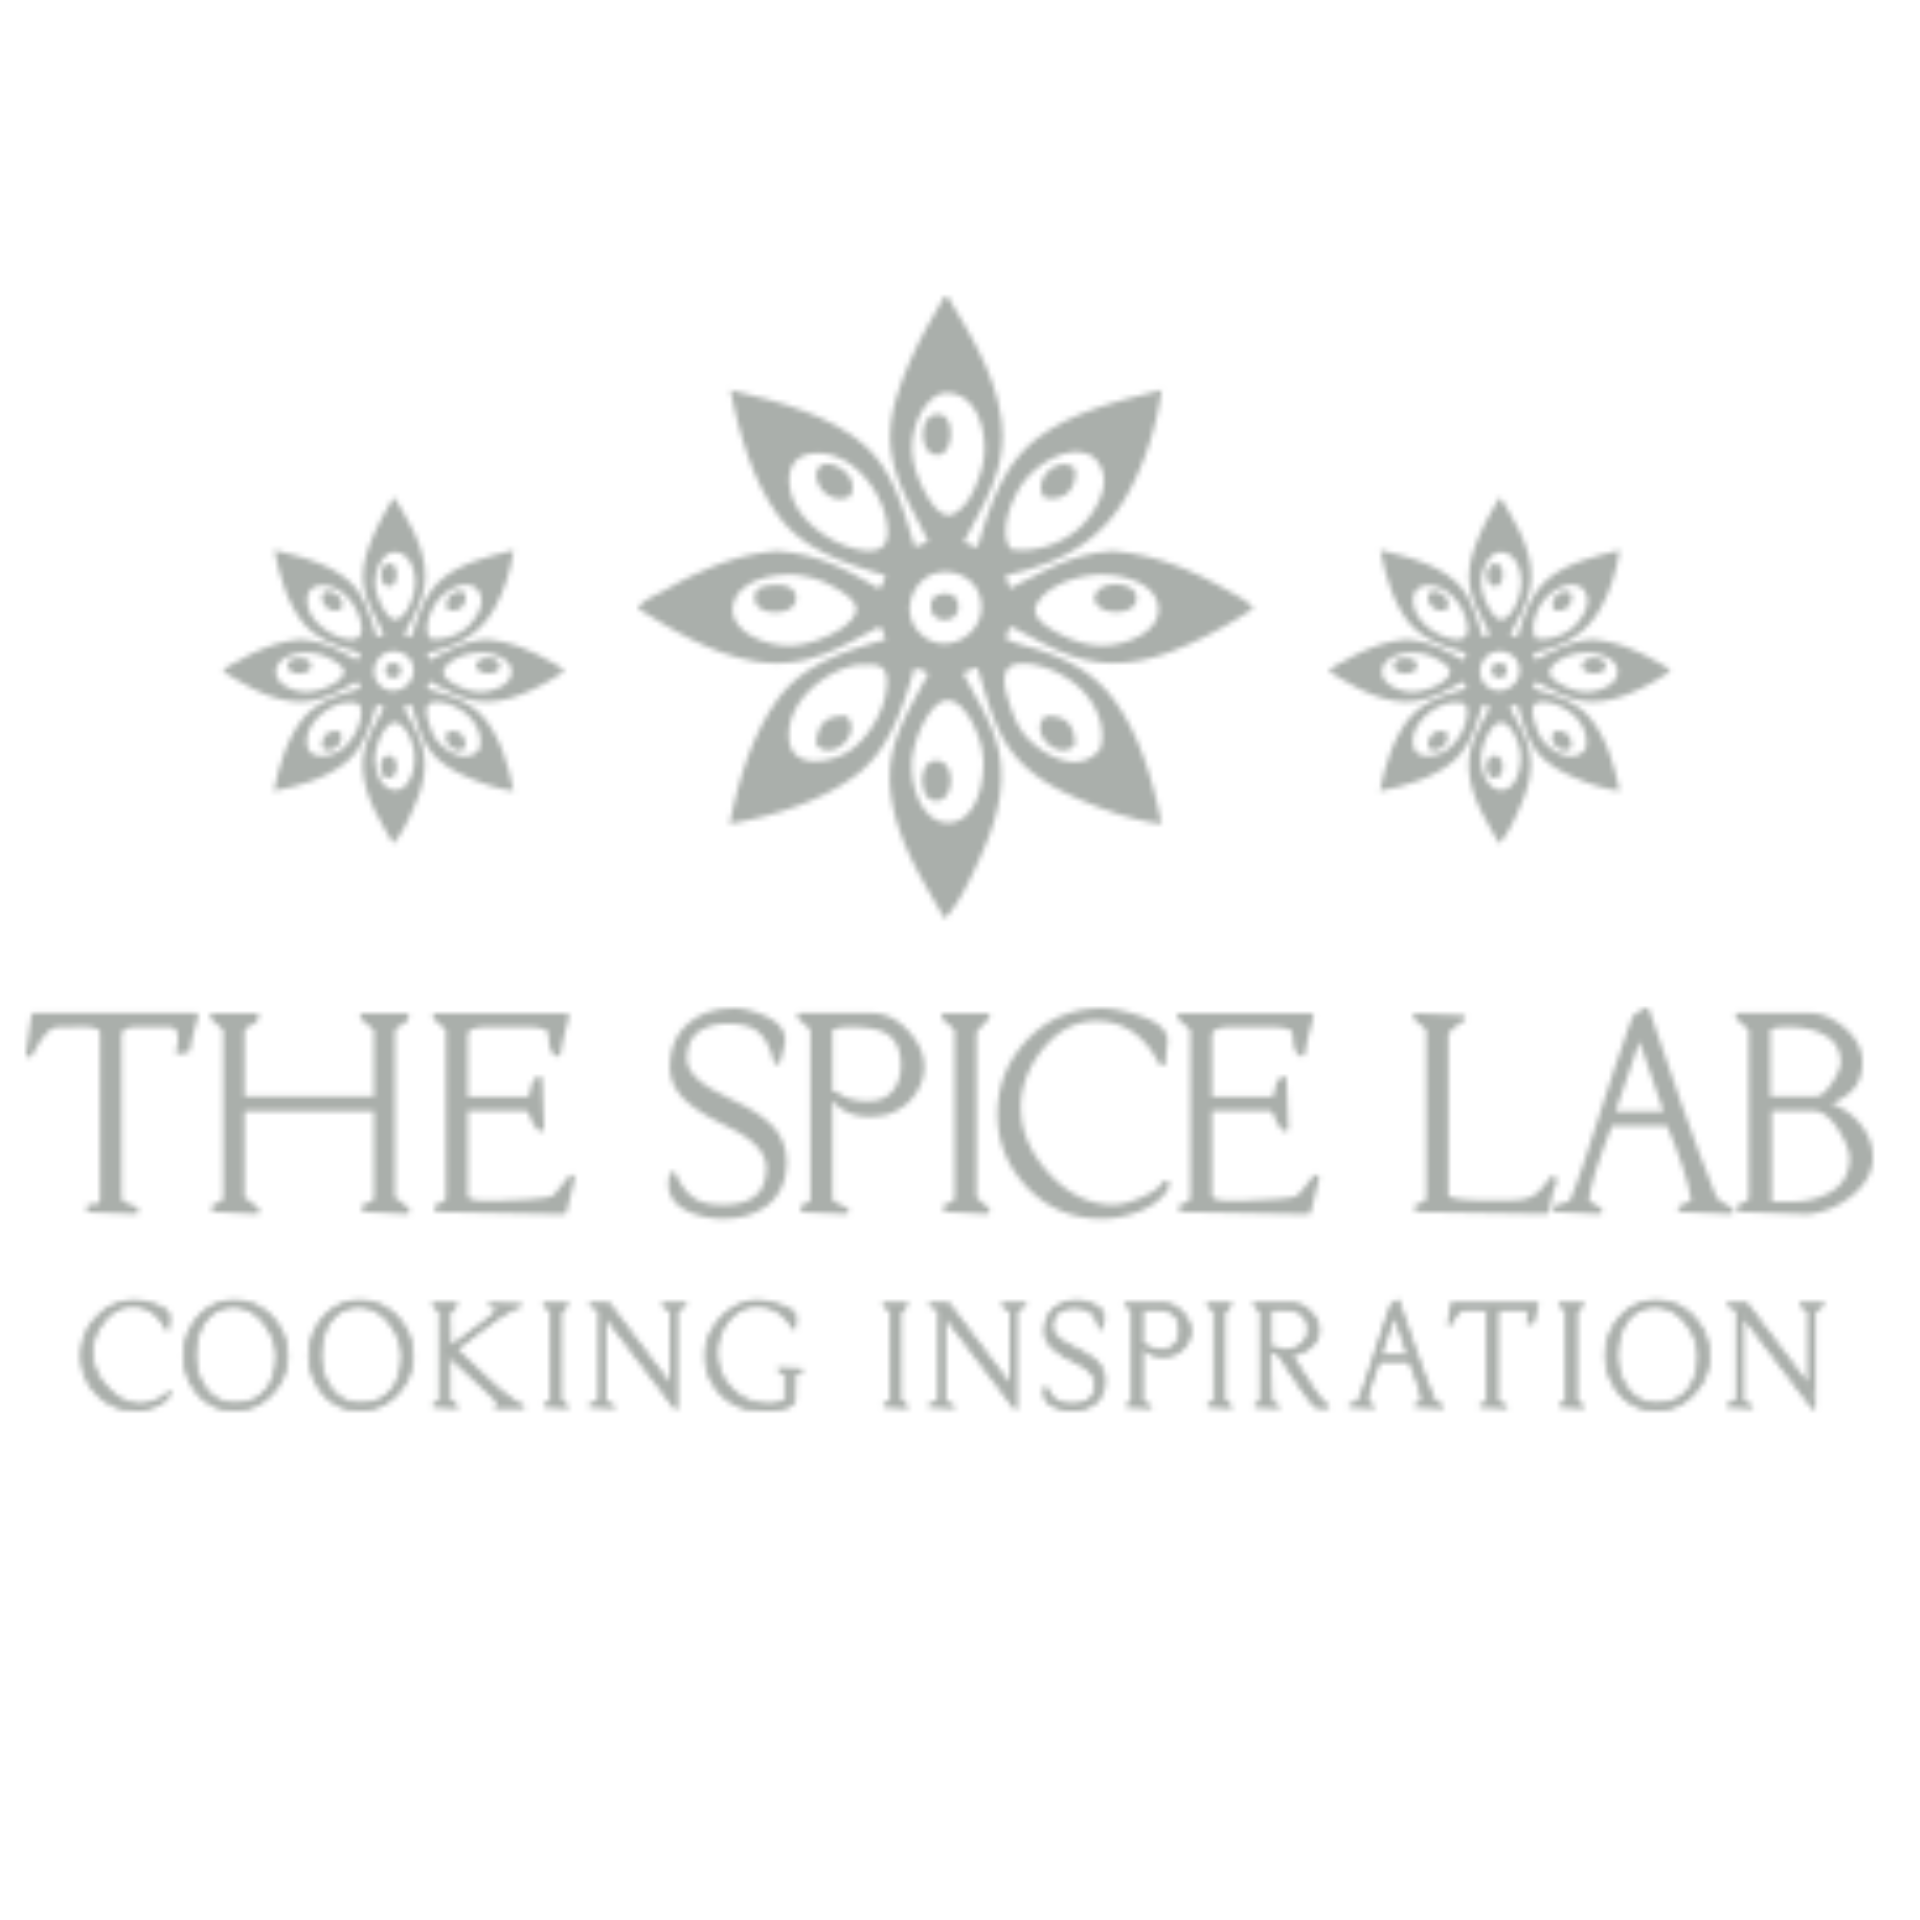 The Spice Lab